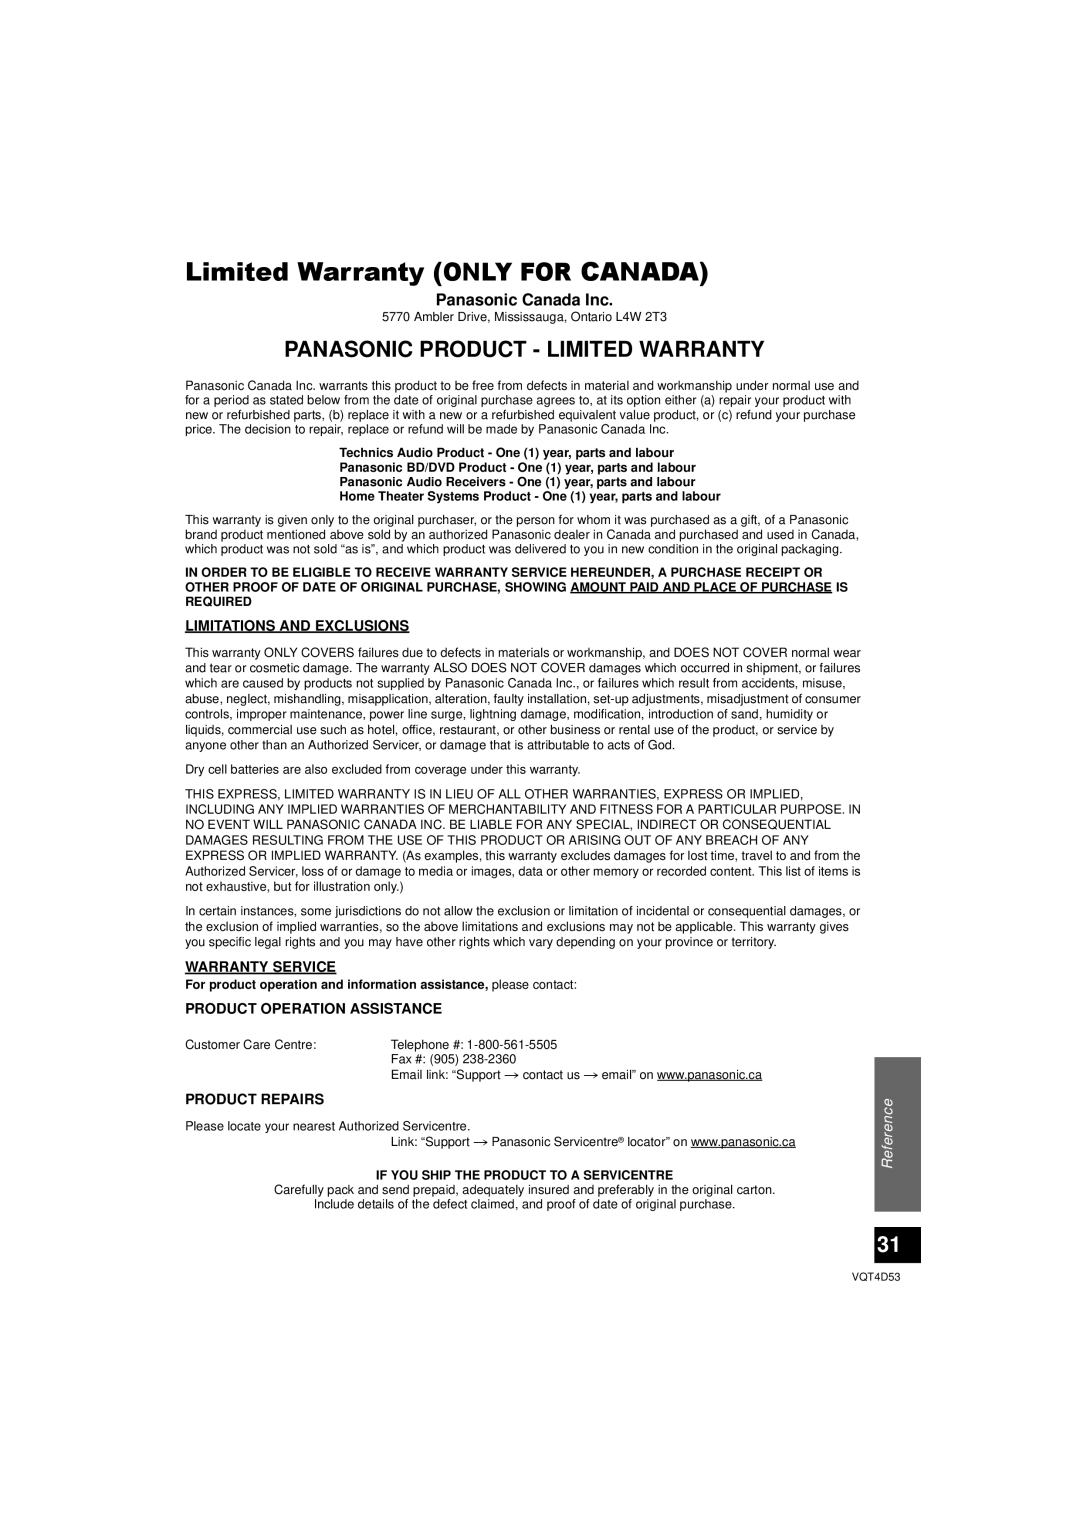 Panasonic SC-HTB20 Limited Warranty ONLY FOR CANADA, Panasonic Product - Limited Warranty, Panasonic Canada Inc, Reference 